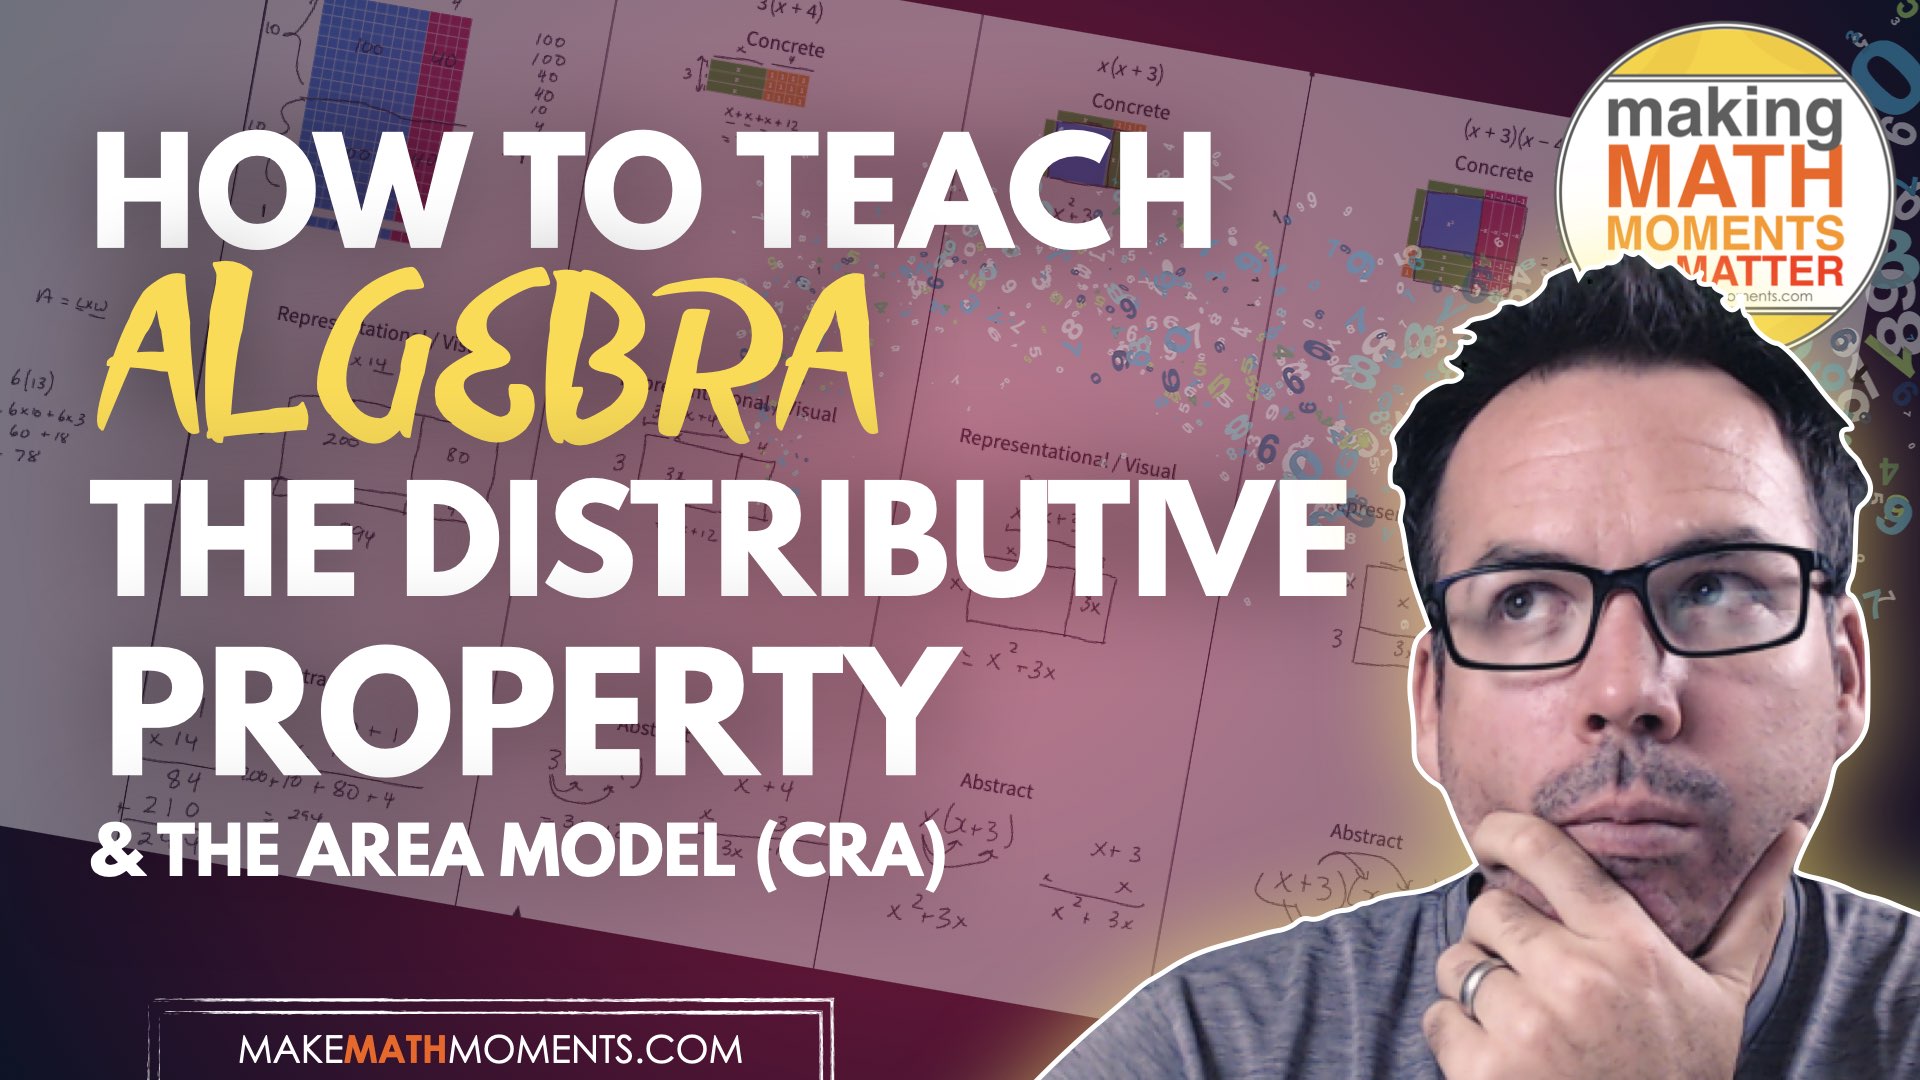 How To Teach Algebra: The Distributive Property Progression with the Area Model (CRA)